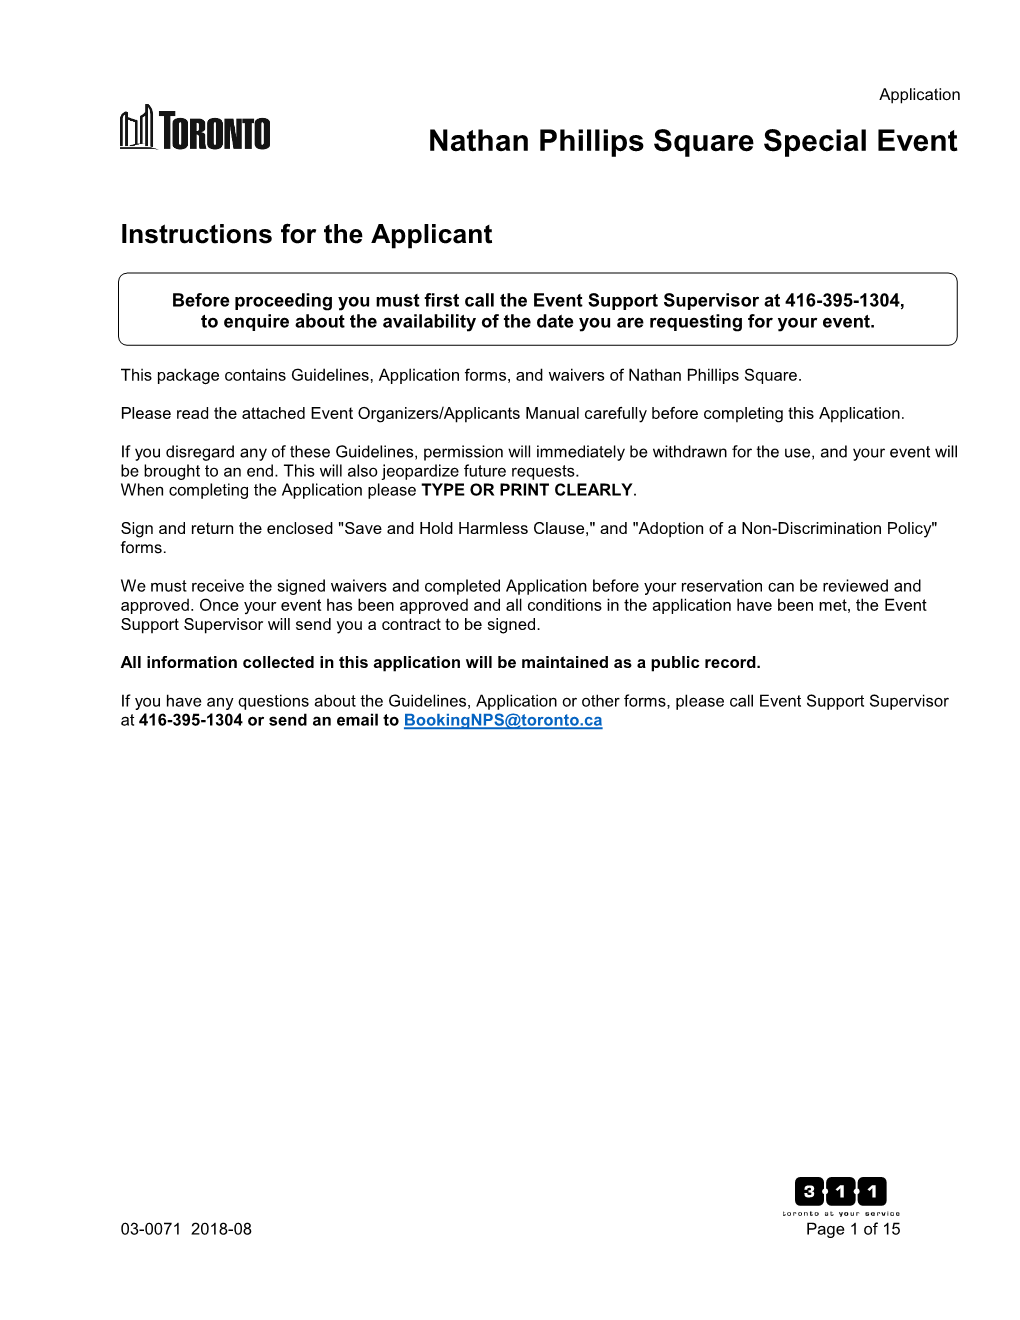 Nathan Phillips Square Application Forms